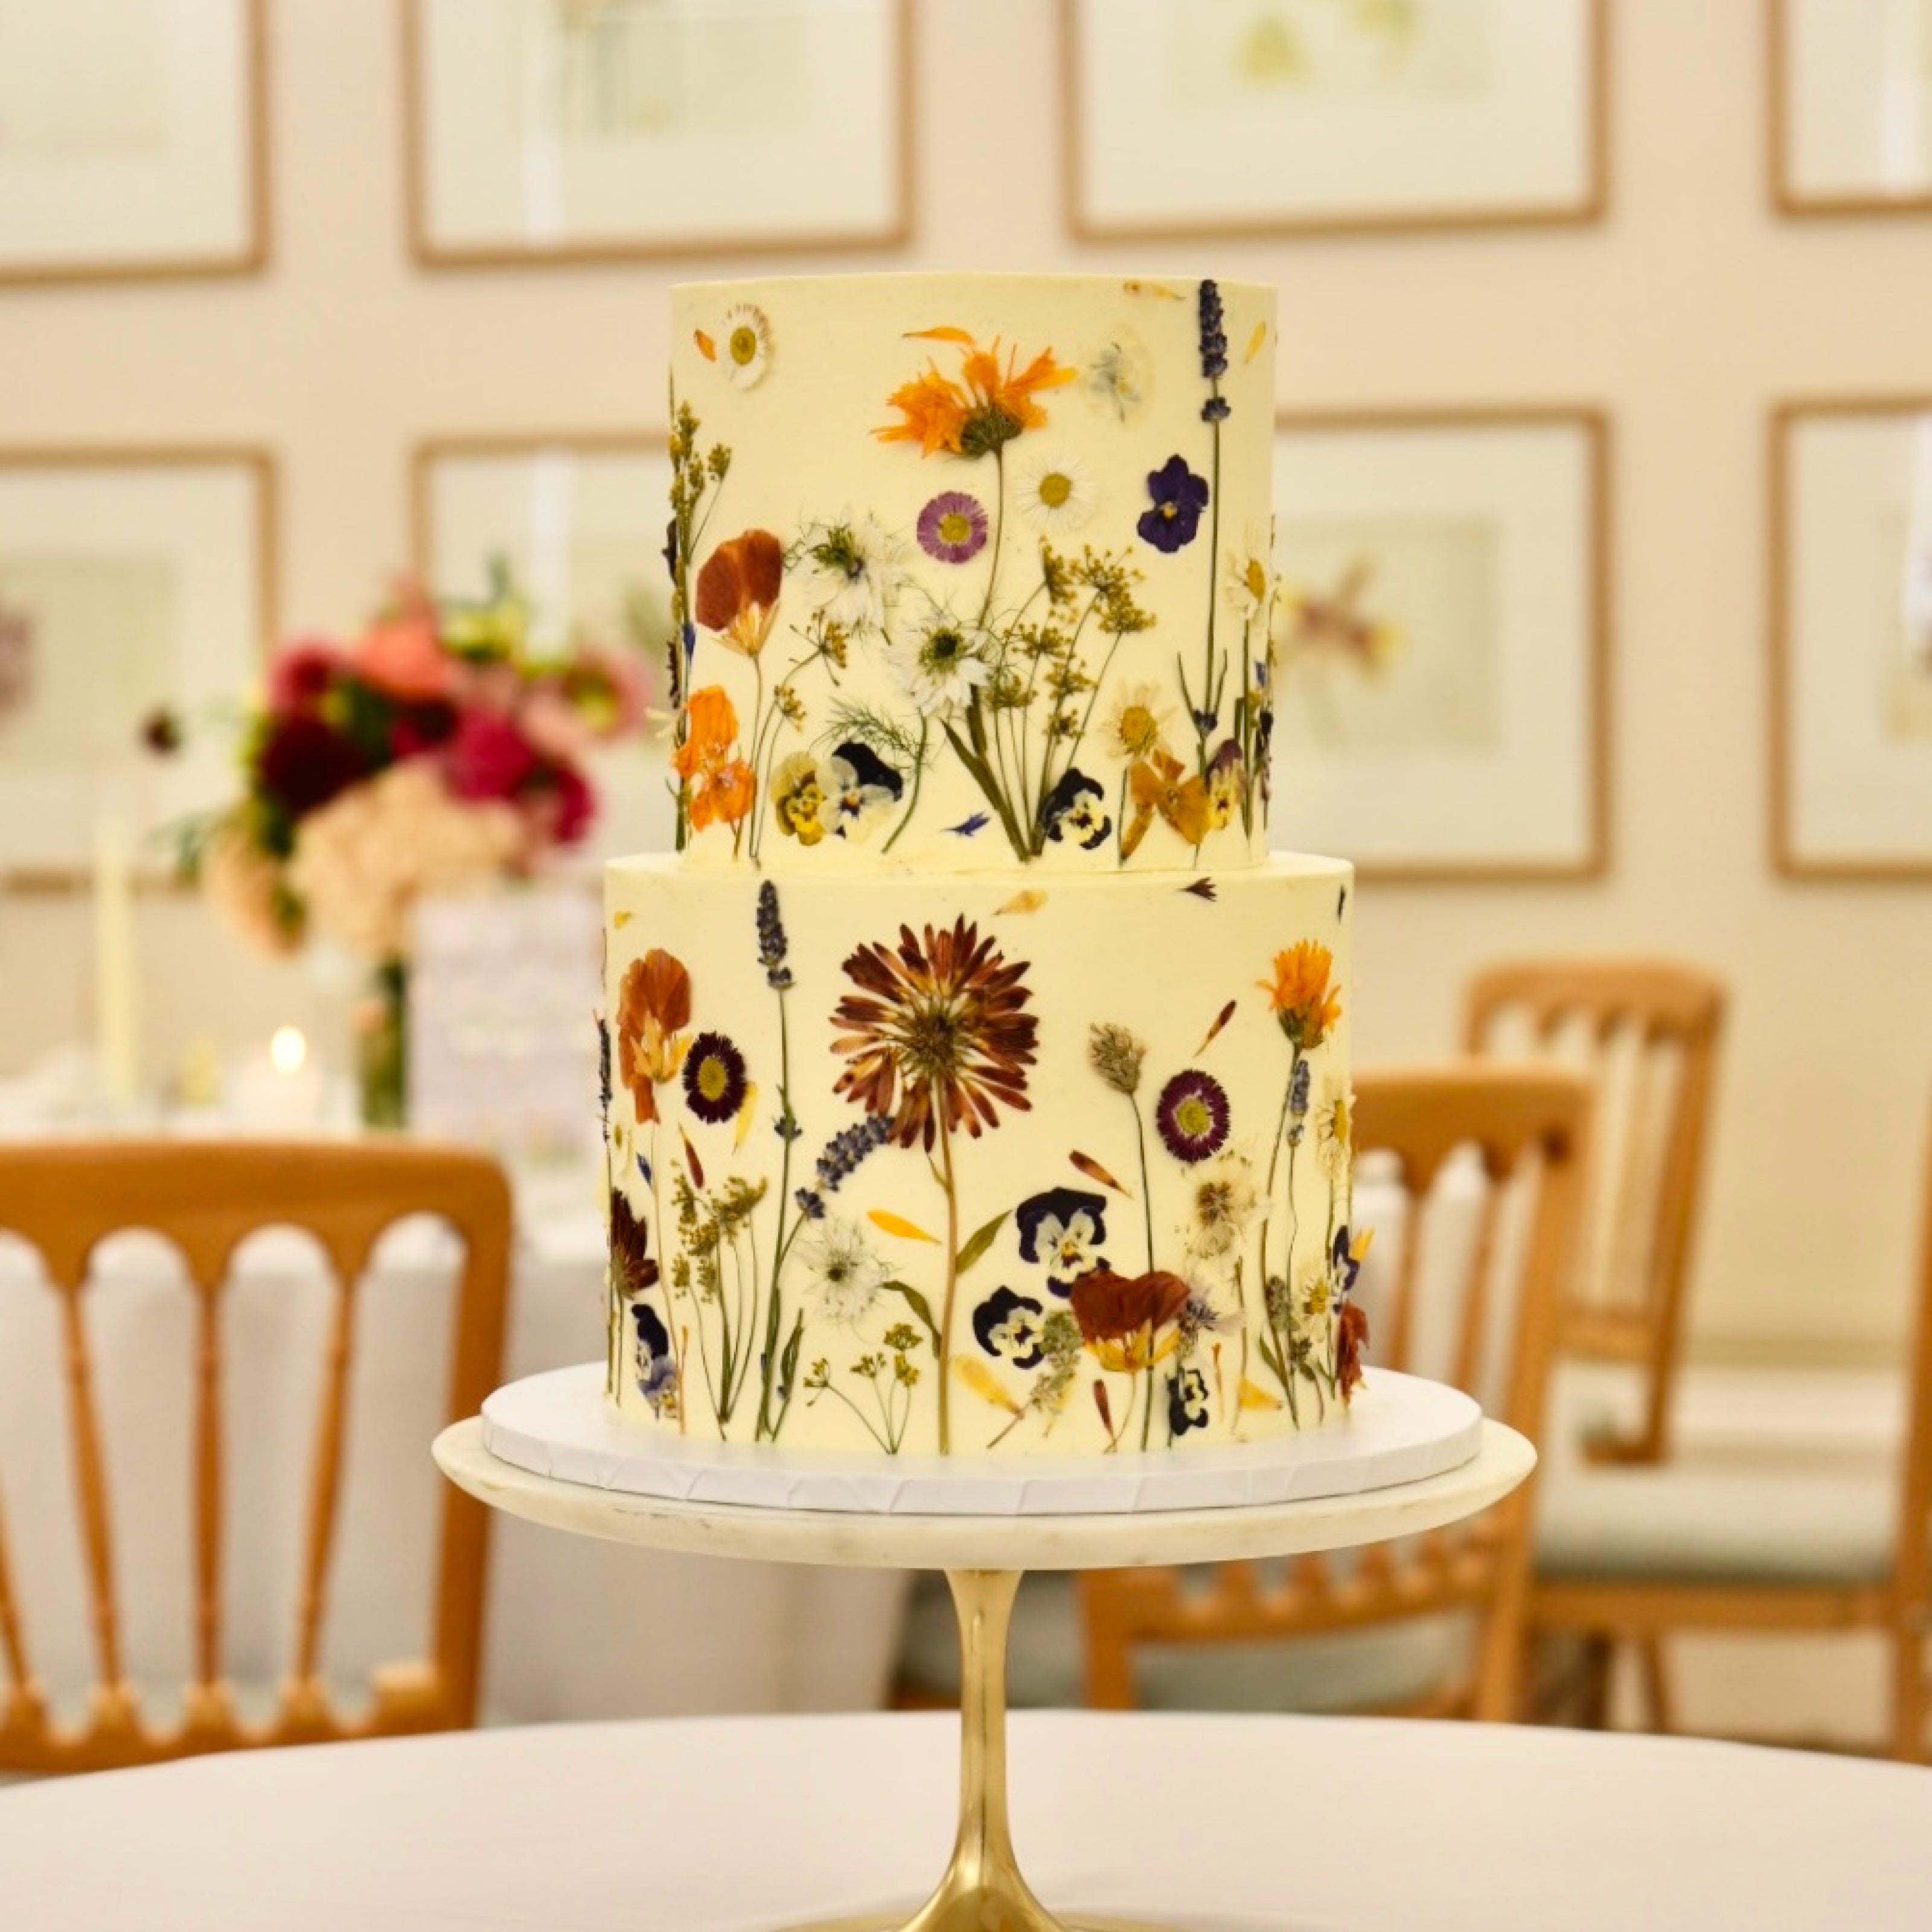 A wedding cake decorated with edible flowers sits on a marble cake stand